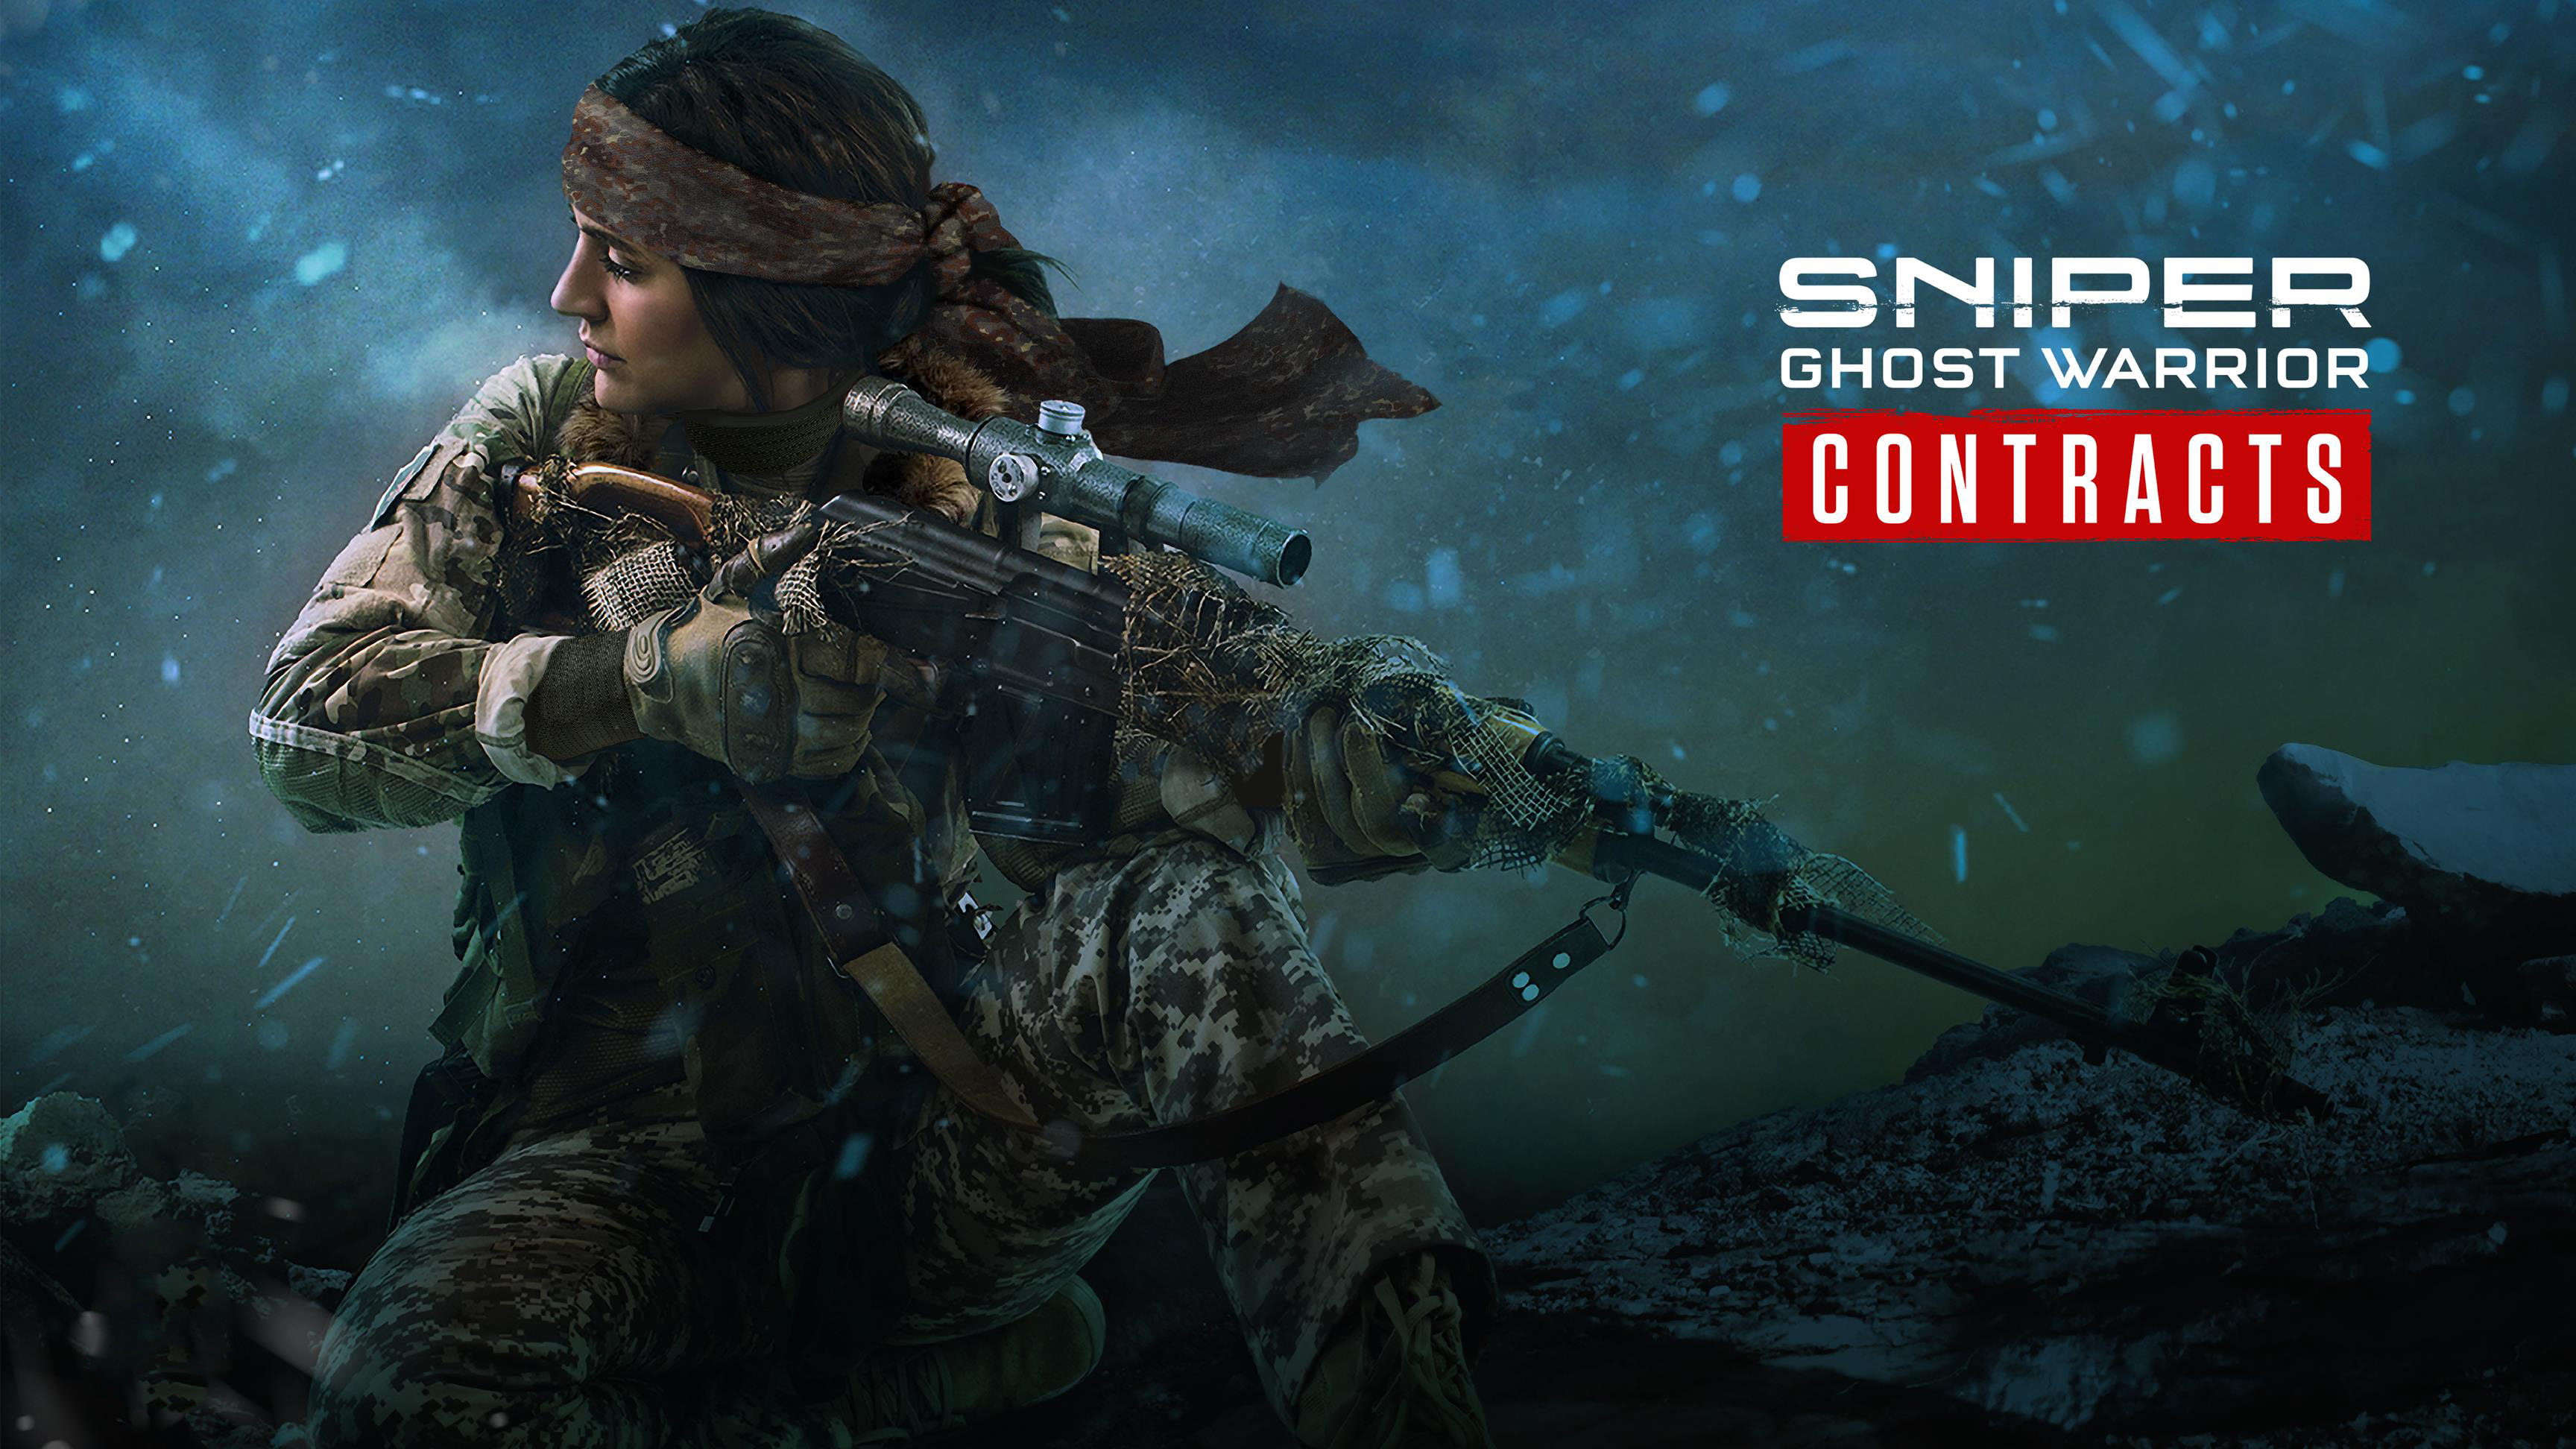 Video Game Sniper Ghost Warrior Contracts 3456x1944